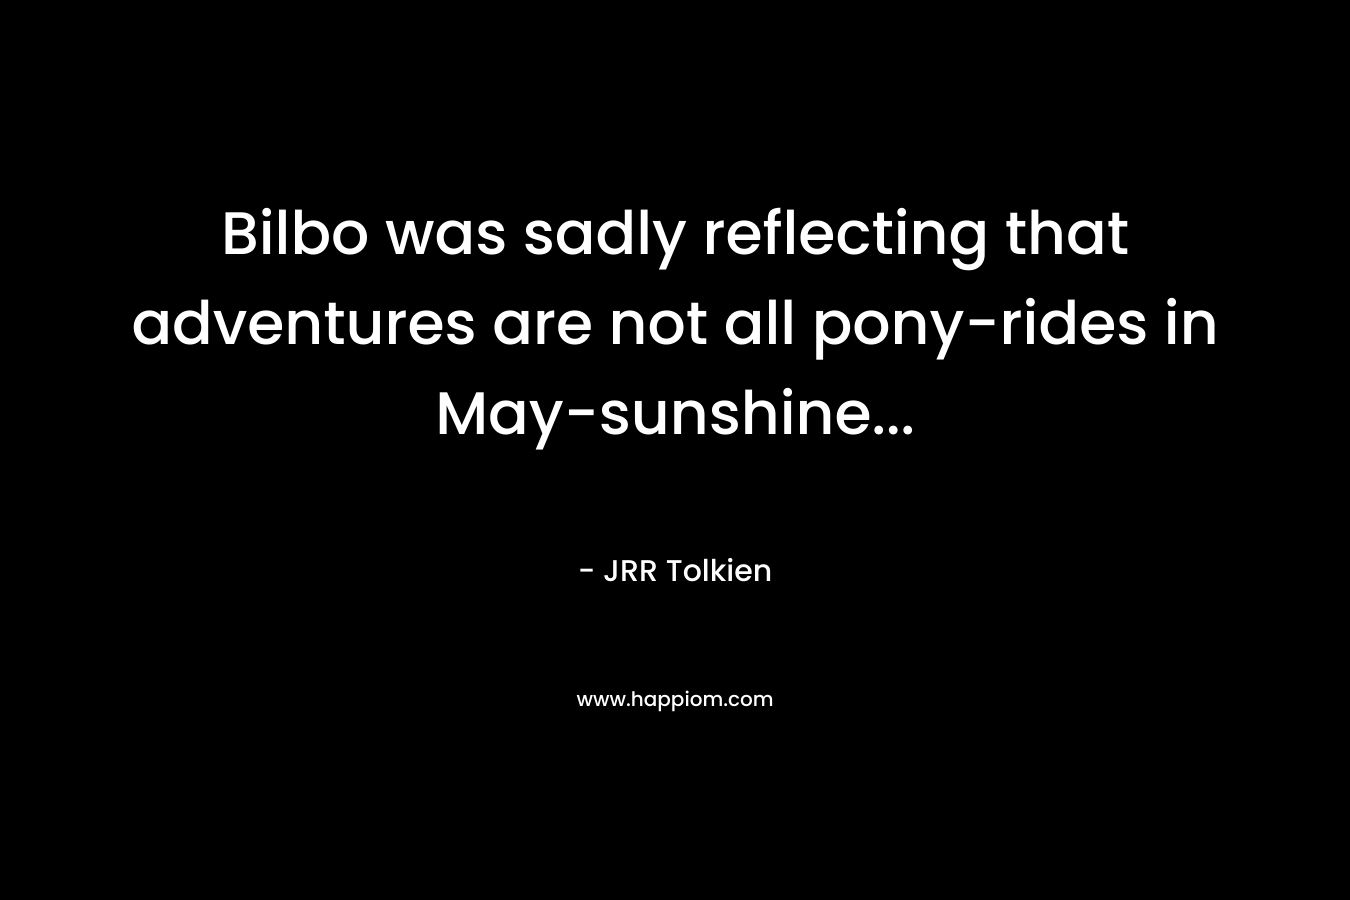 Bilbo was sadly reflecting that adventures are not all pony-rides in May-sunshine...